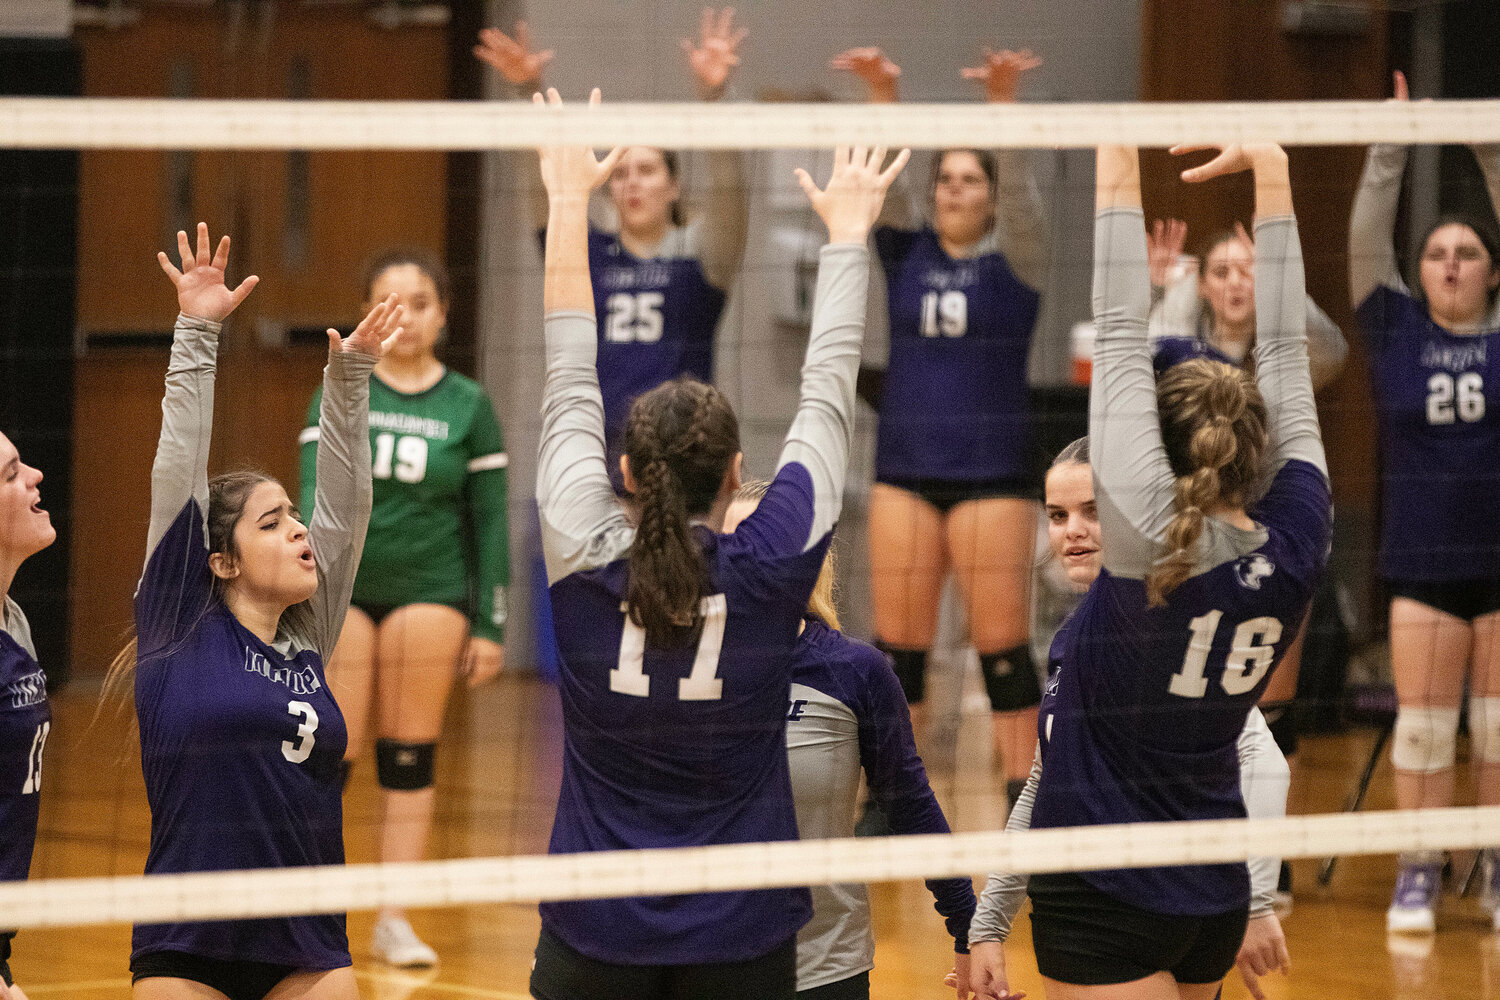 Daniela DeSano (left) and the Huskies celebrate after an ace.